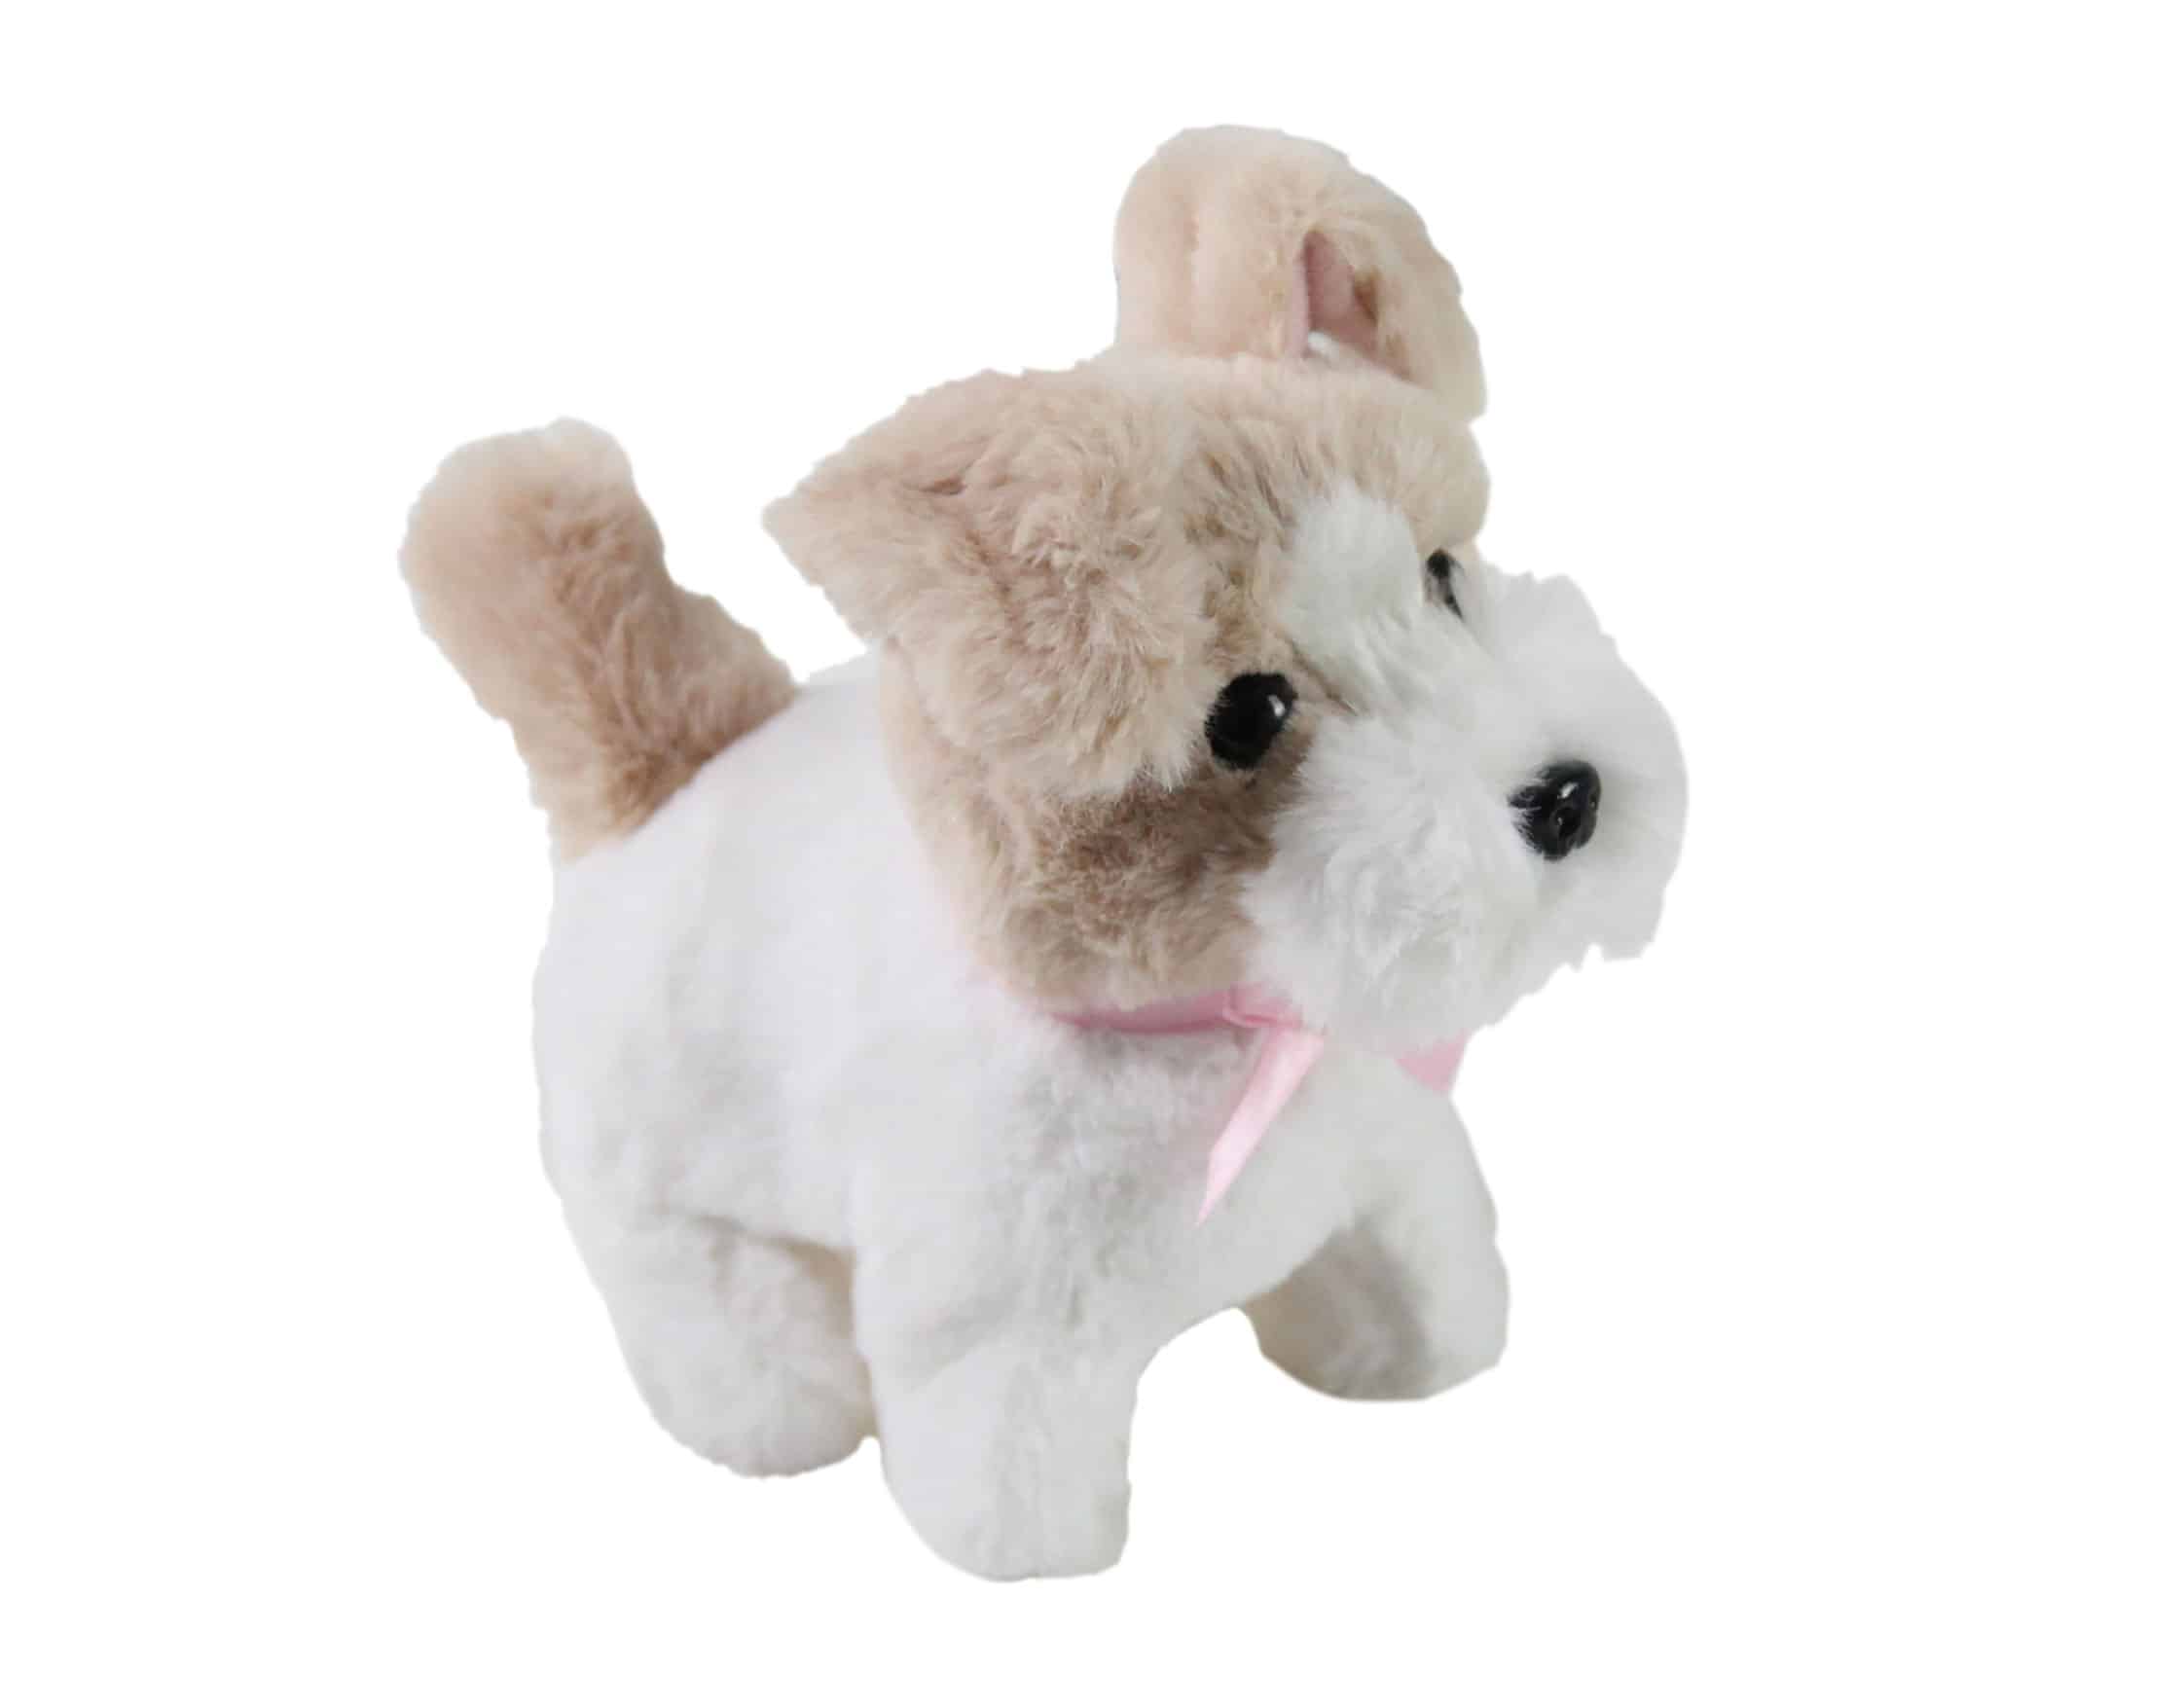 White and brown terrier stuffed animal with pink bow.